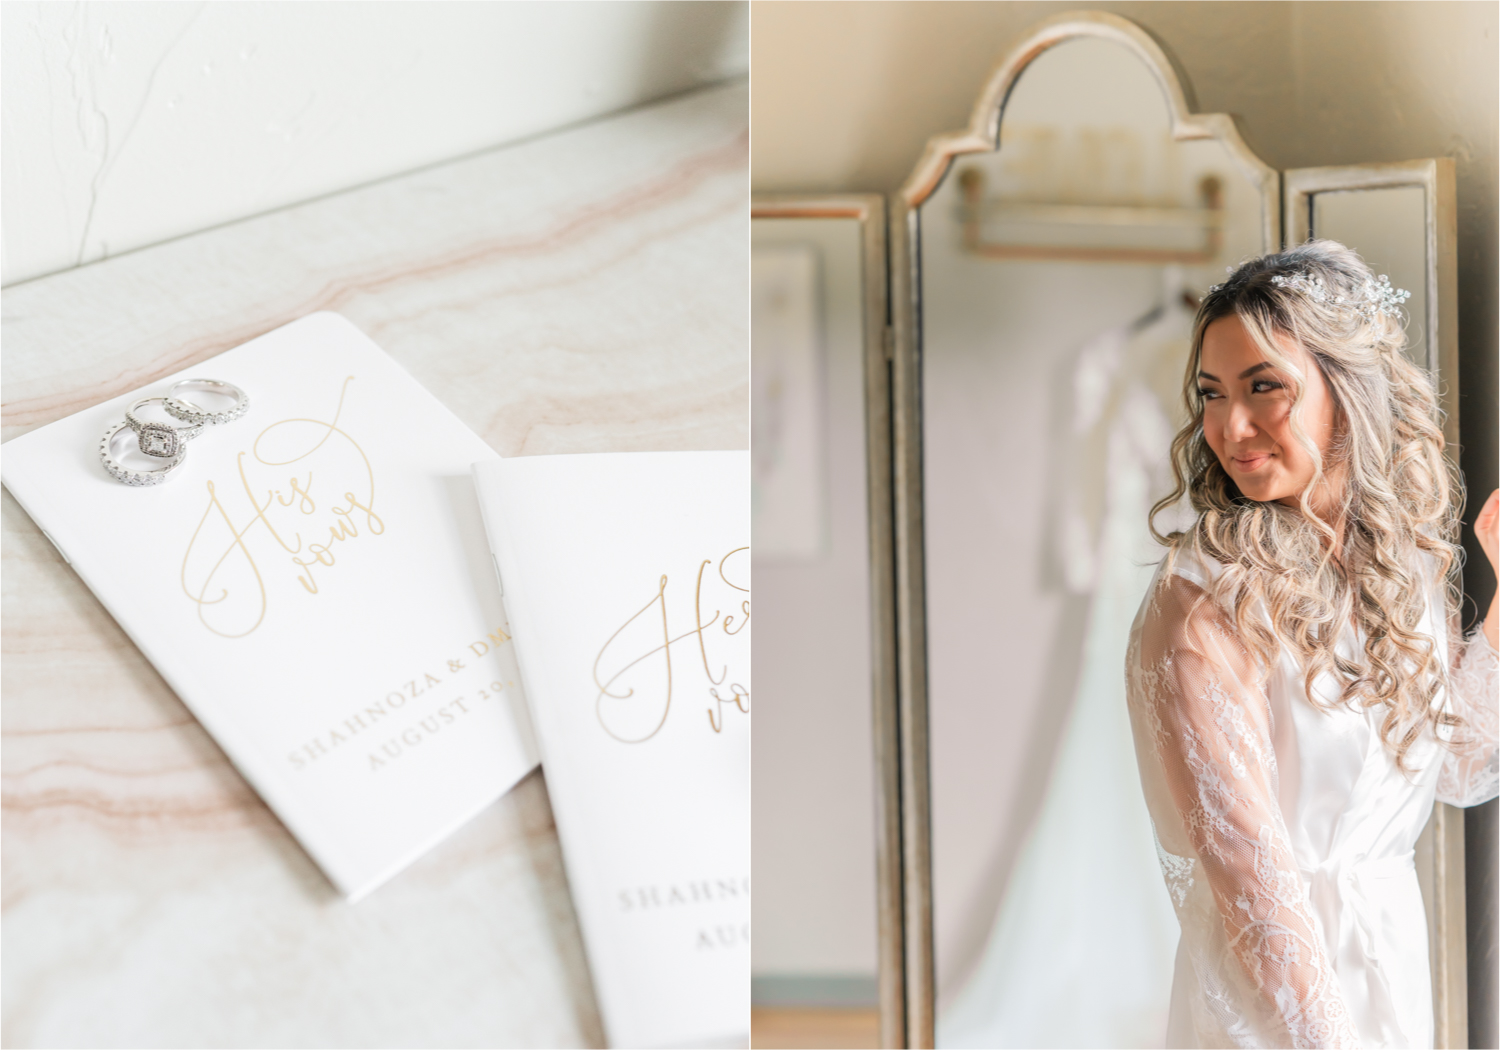 Romantic and Rustic Wedding at The Mill in Windsor | Britni Girard Photography | Colorado based wedding photography and videography team | Bride Portraits | Bride's Dress from Madeira Wedding in Kiev Ukraine | Bridal House at The Mill 